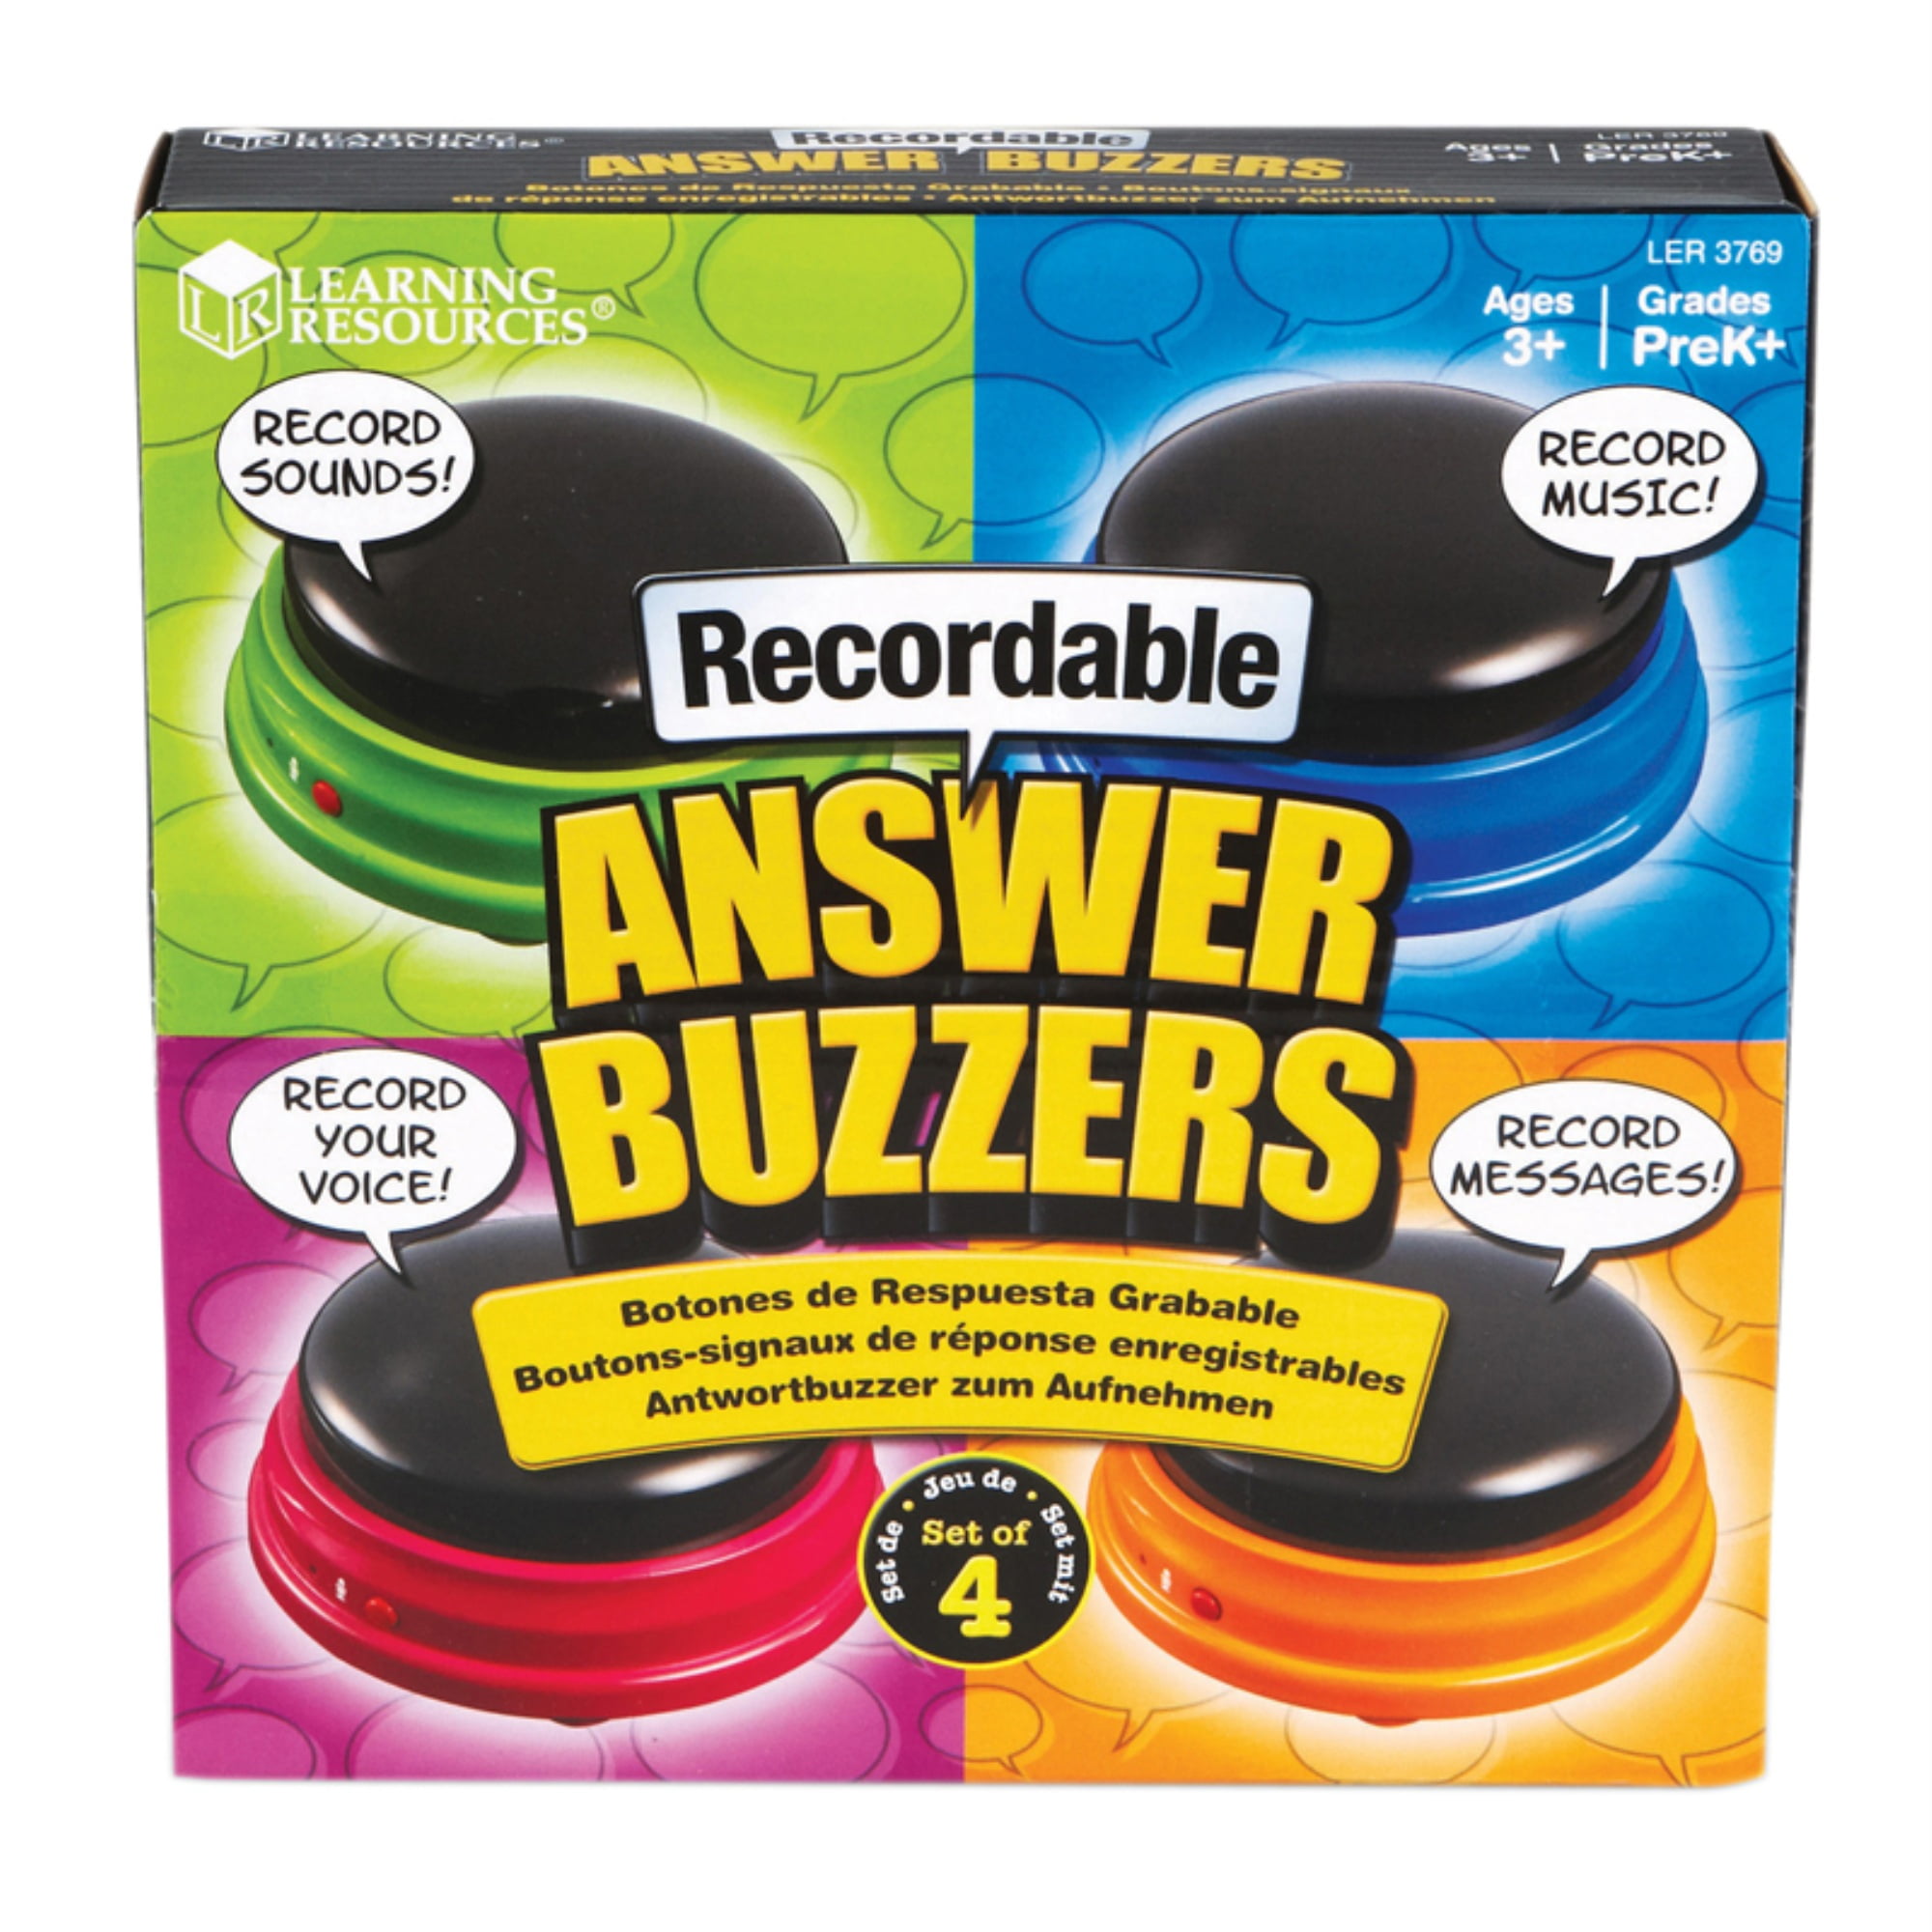 Details about   RECORDABLE ANSWER BUZZERS Talking Button Personalized Sound Learning Kids Toys 